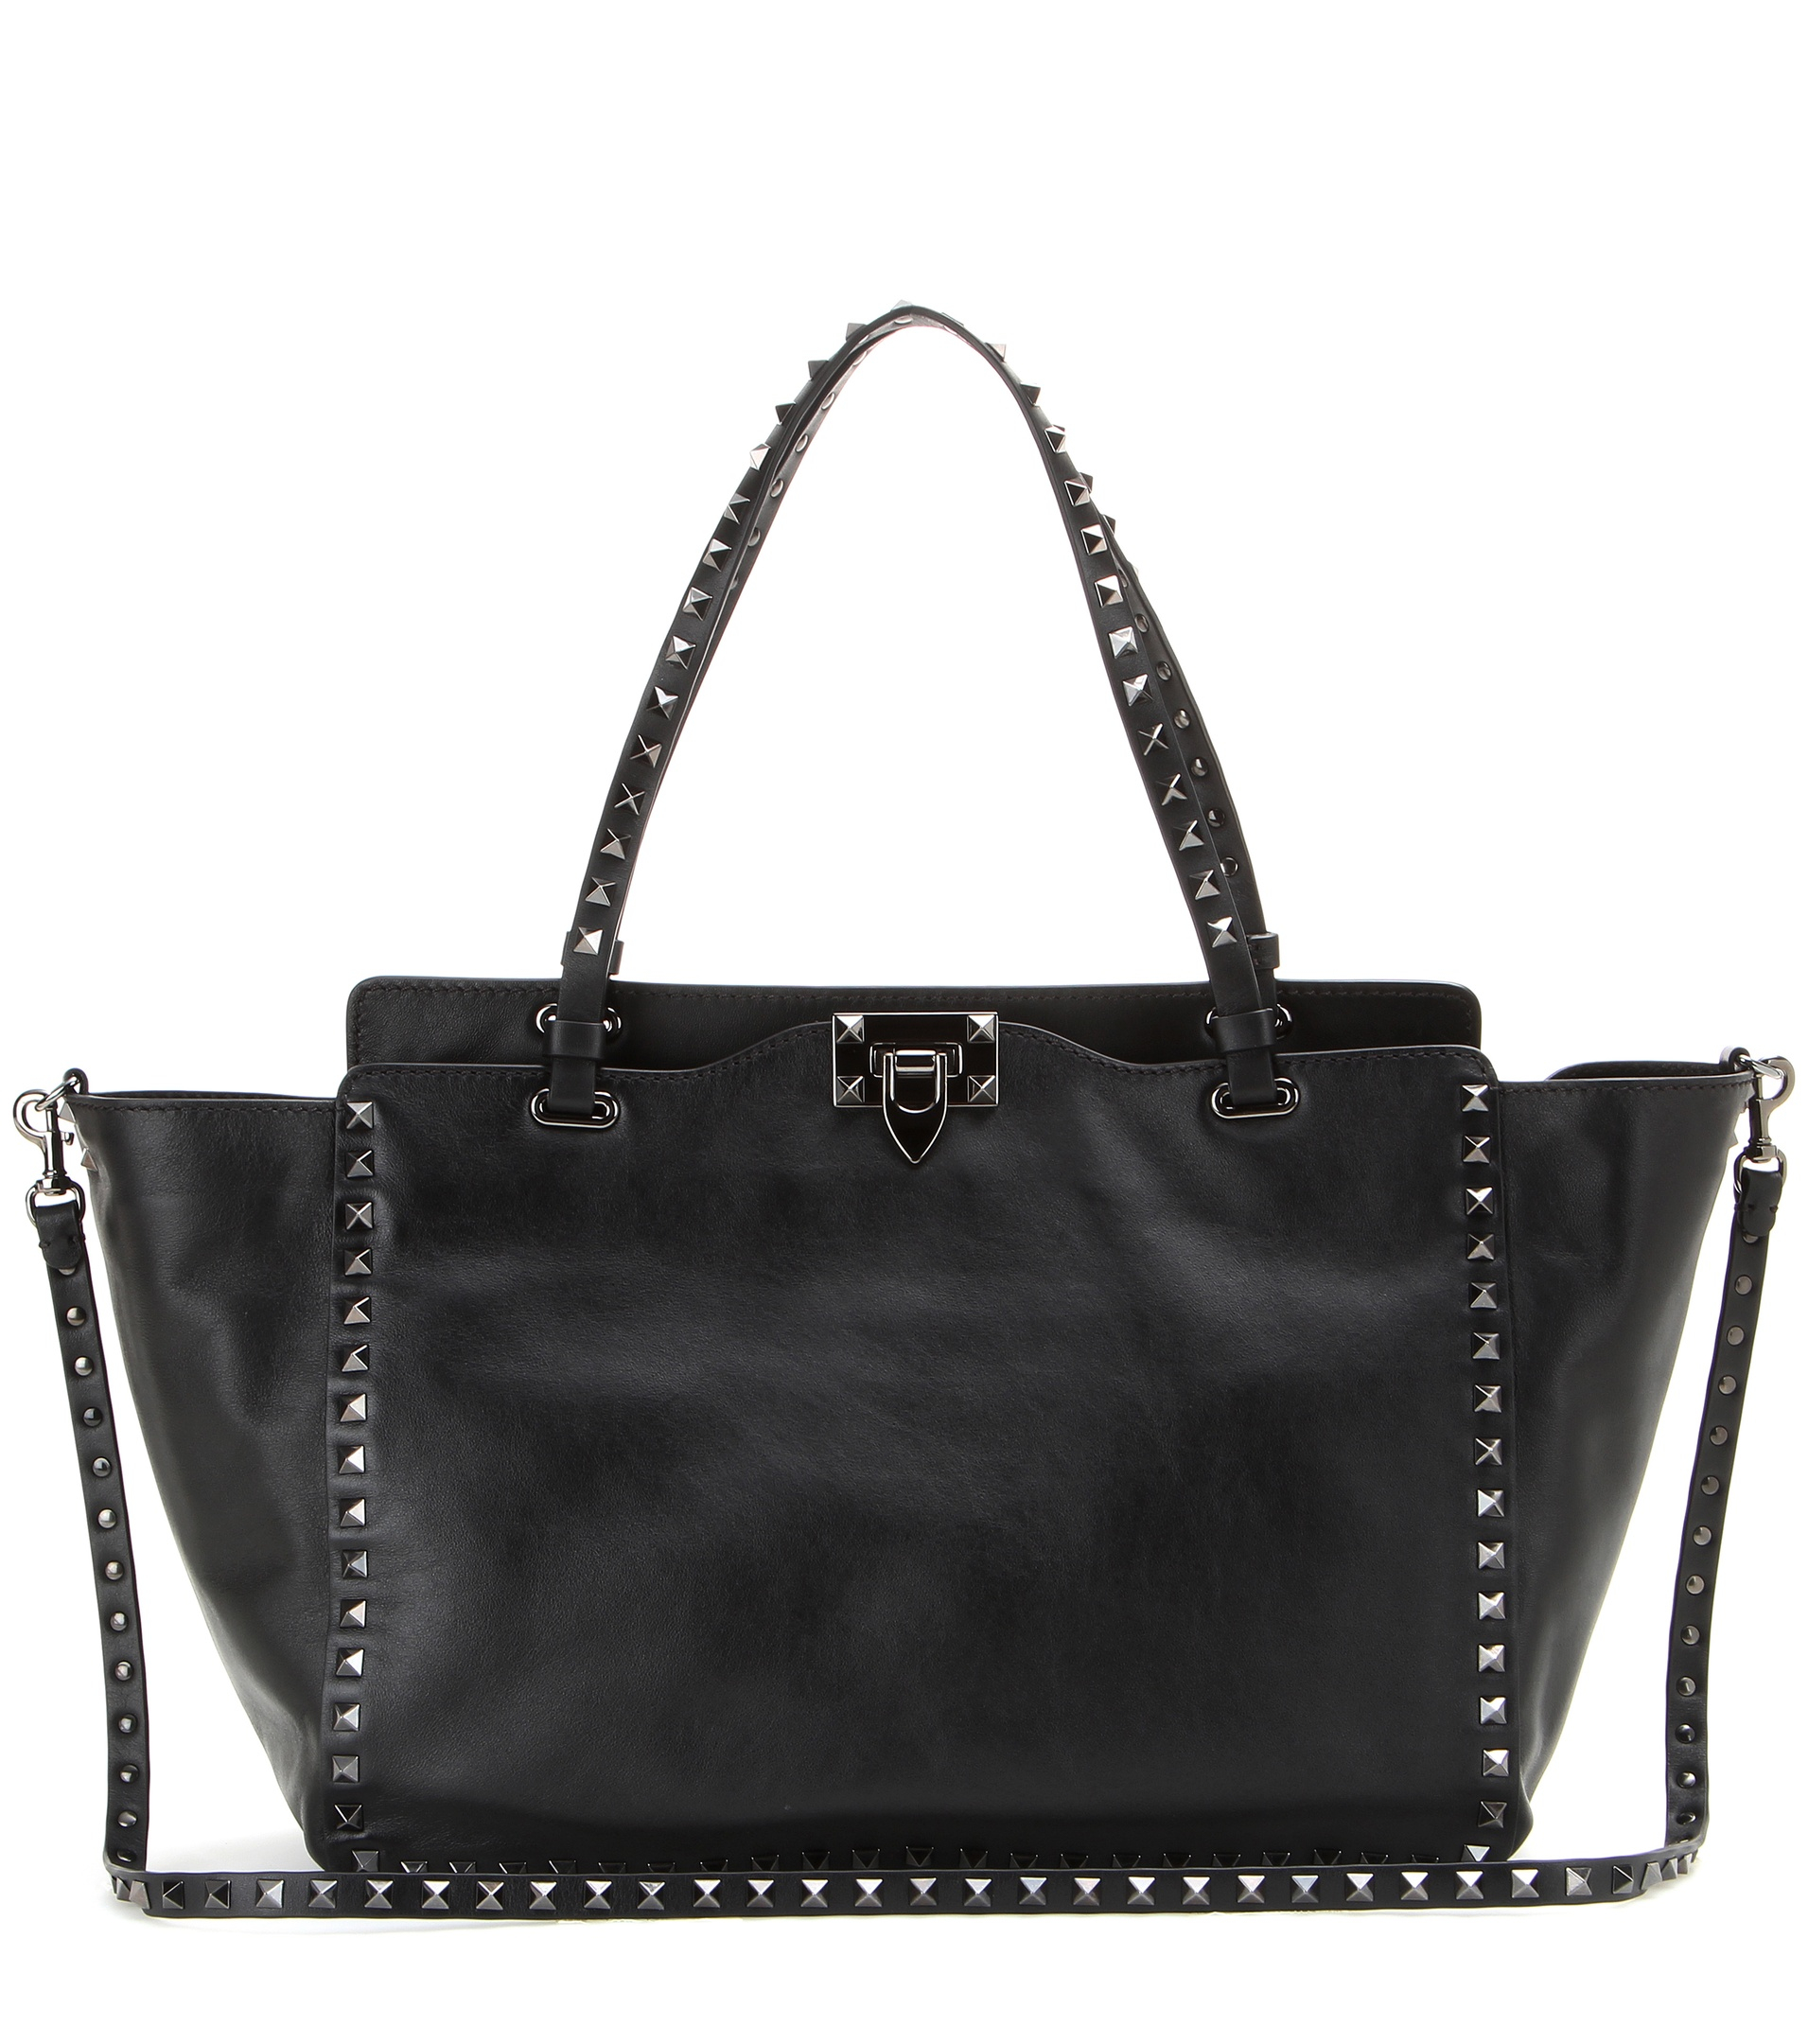 Valentino Rockstud Noir Small Leather Tote in Black - Lyst